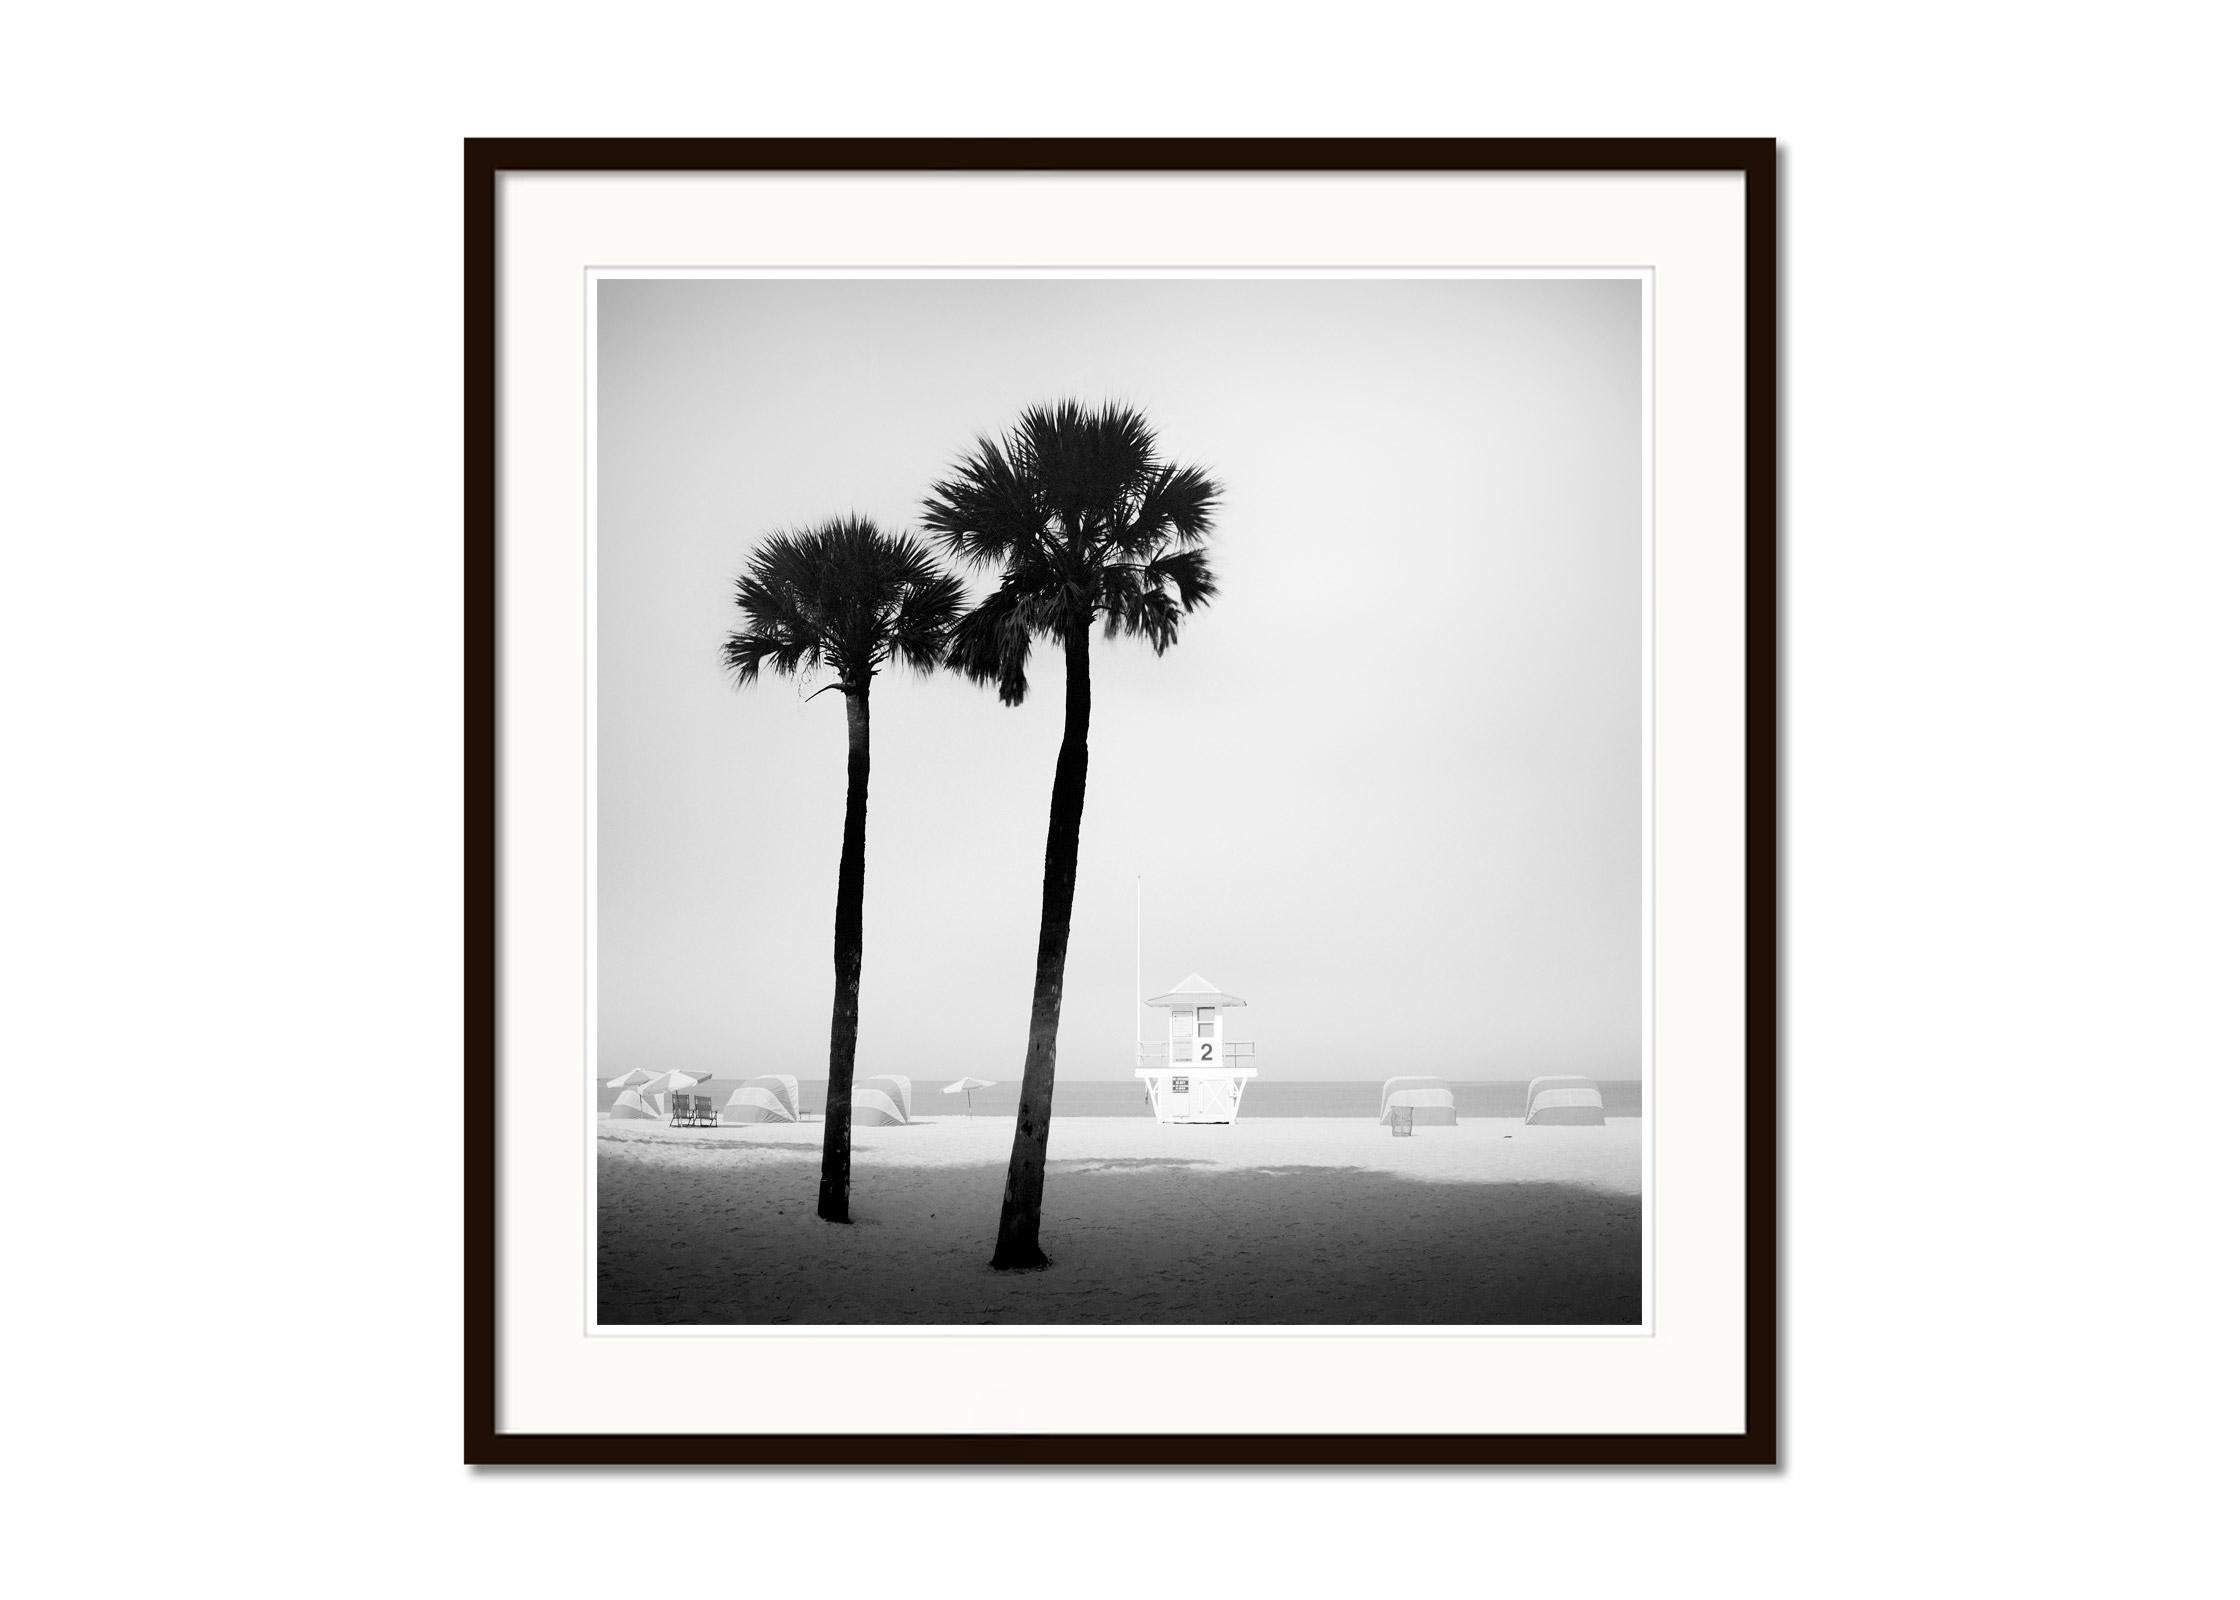 Black and white fine art photography. Lifeguard tower on Miami beach with palm trees and beach chairs, Florida, USA. Archival pigment ink print, edition of 9. Signed, titled, dated and numbered by artist. Certificate of authenticity included.